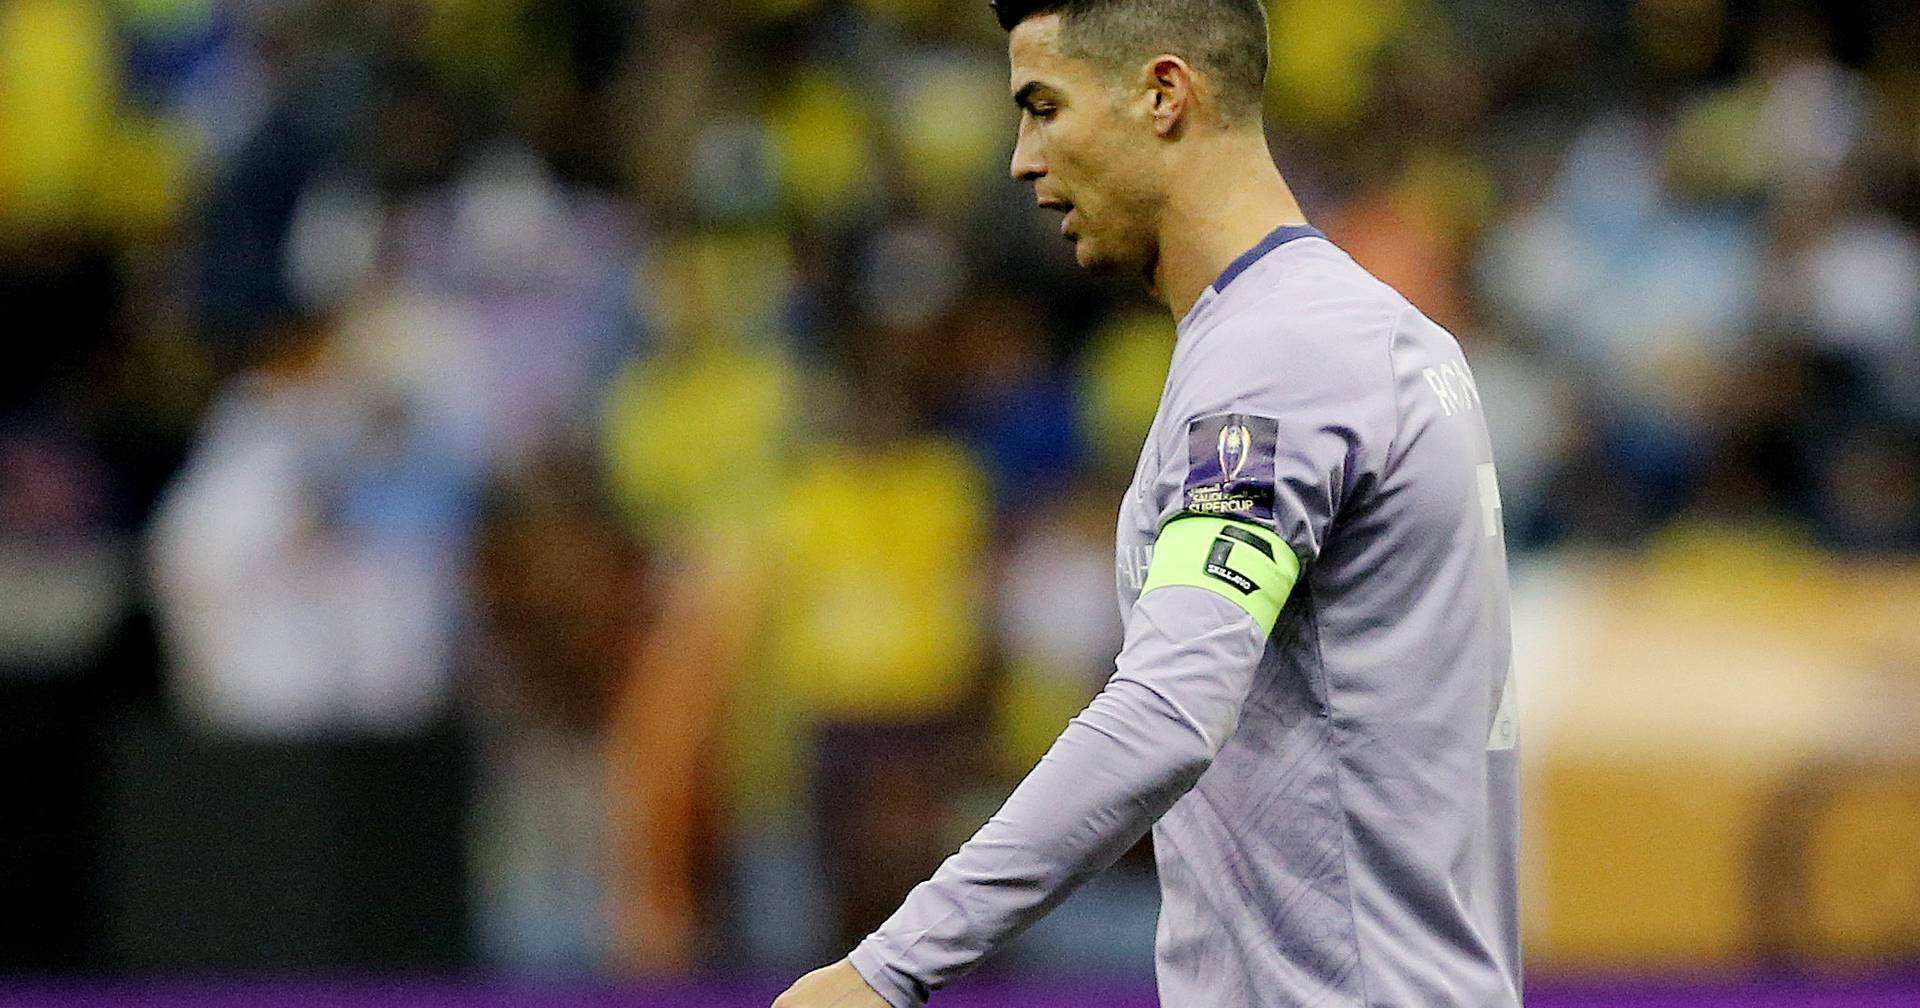 Al-Nassr loses, the fans shout at Messi, and Ronaldo responds with an obscene gesture